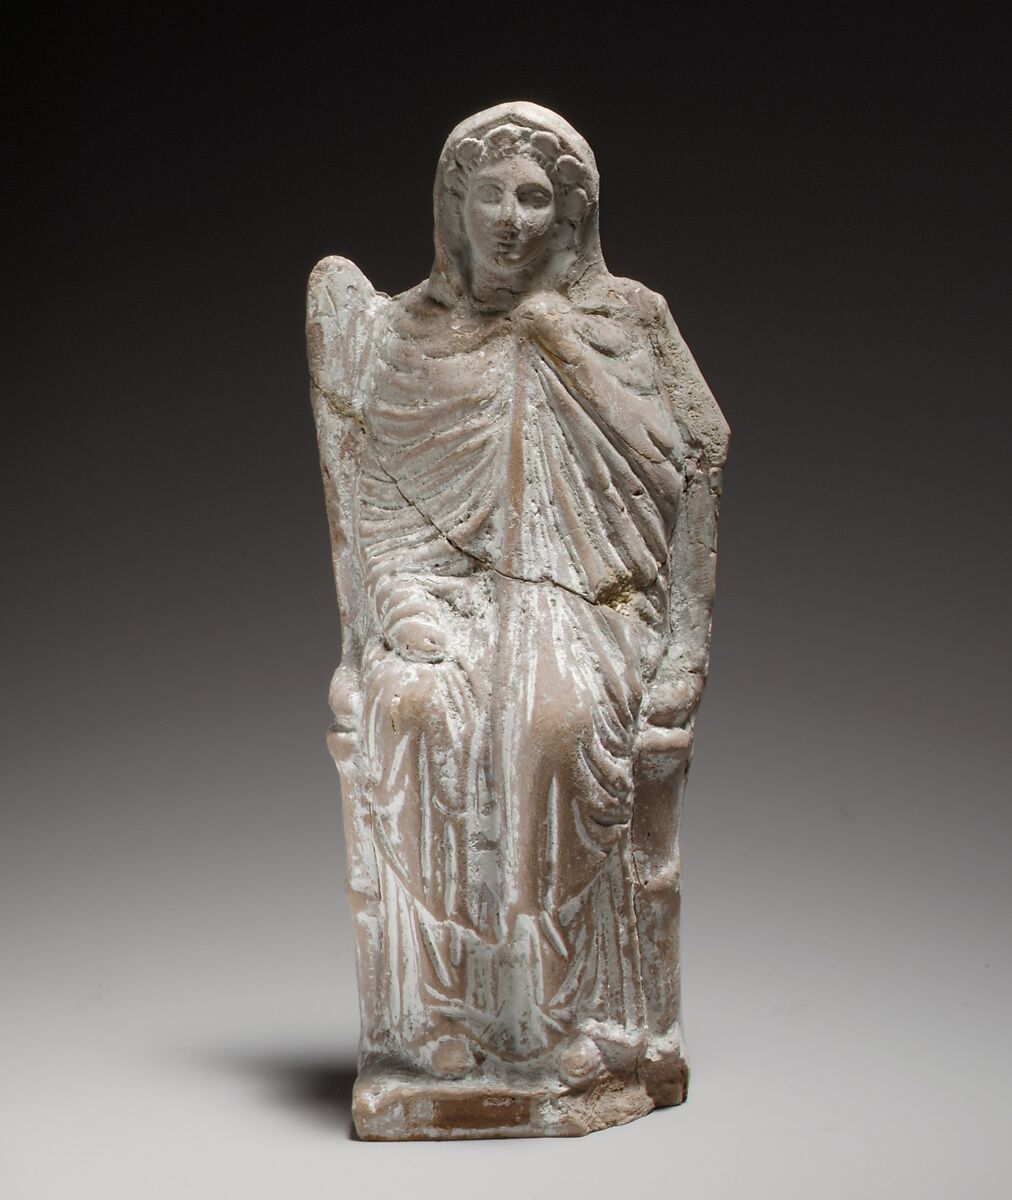 Terracotta statuette of a seated goddess, Terracotta, Cypriot 